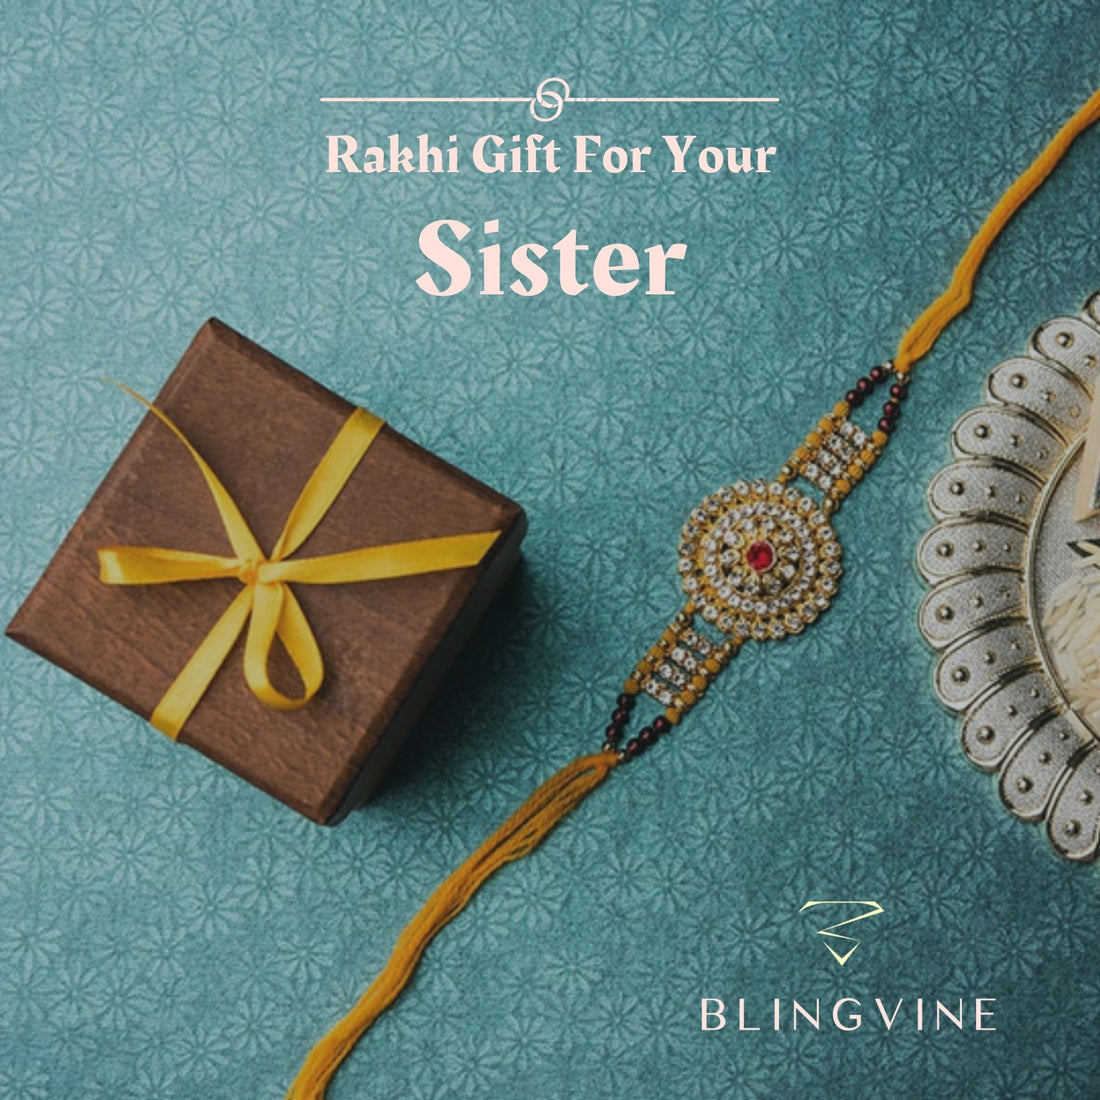 What is the best gift to give a sister on Raksha Bandhan? | Oilpixel